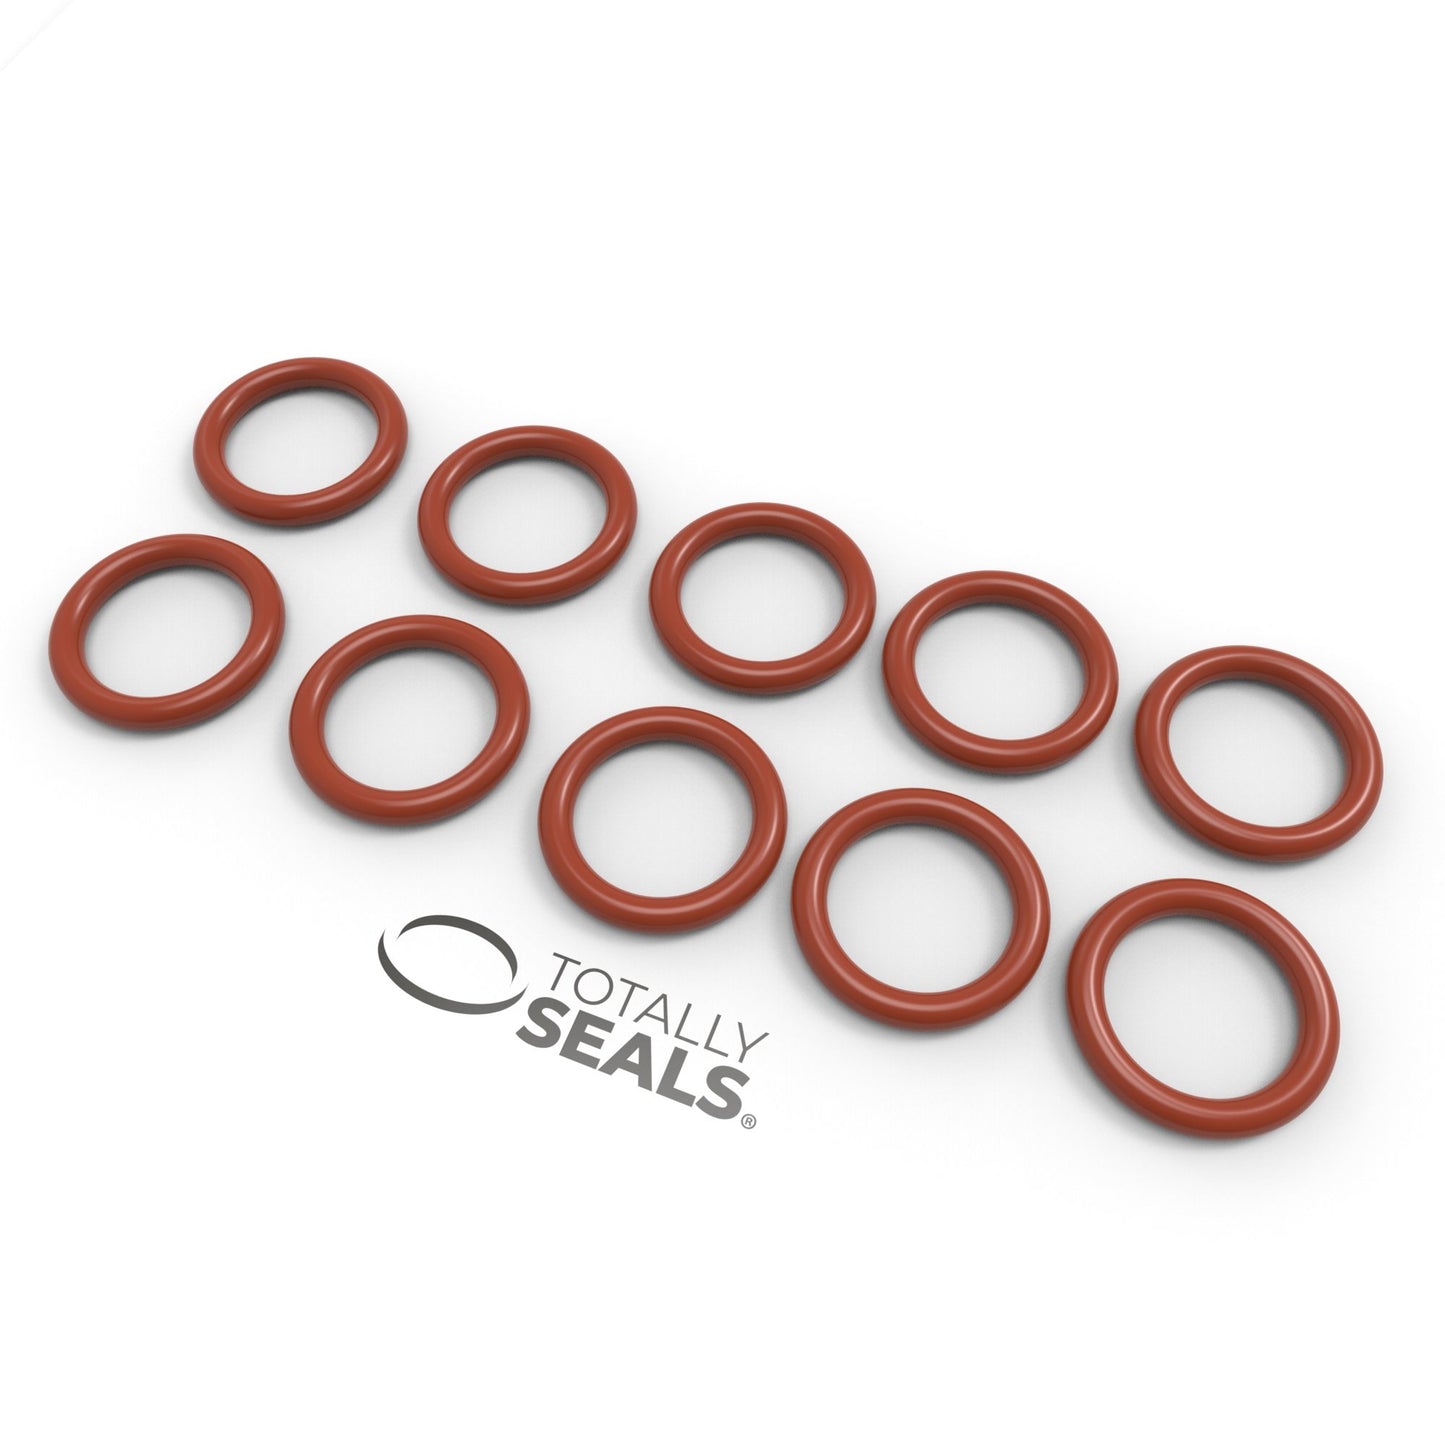 13mm x 2mm (17mm OD) Silicone O-Rings - Totally Seals®